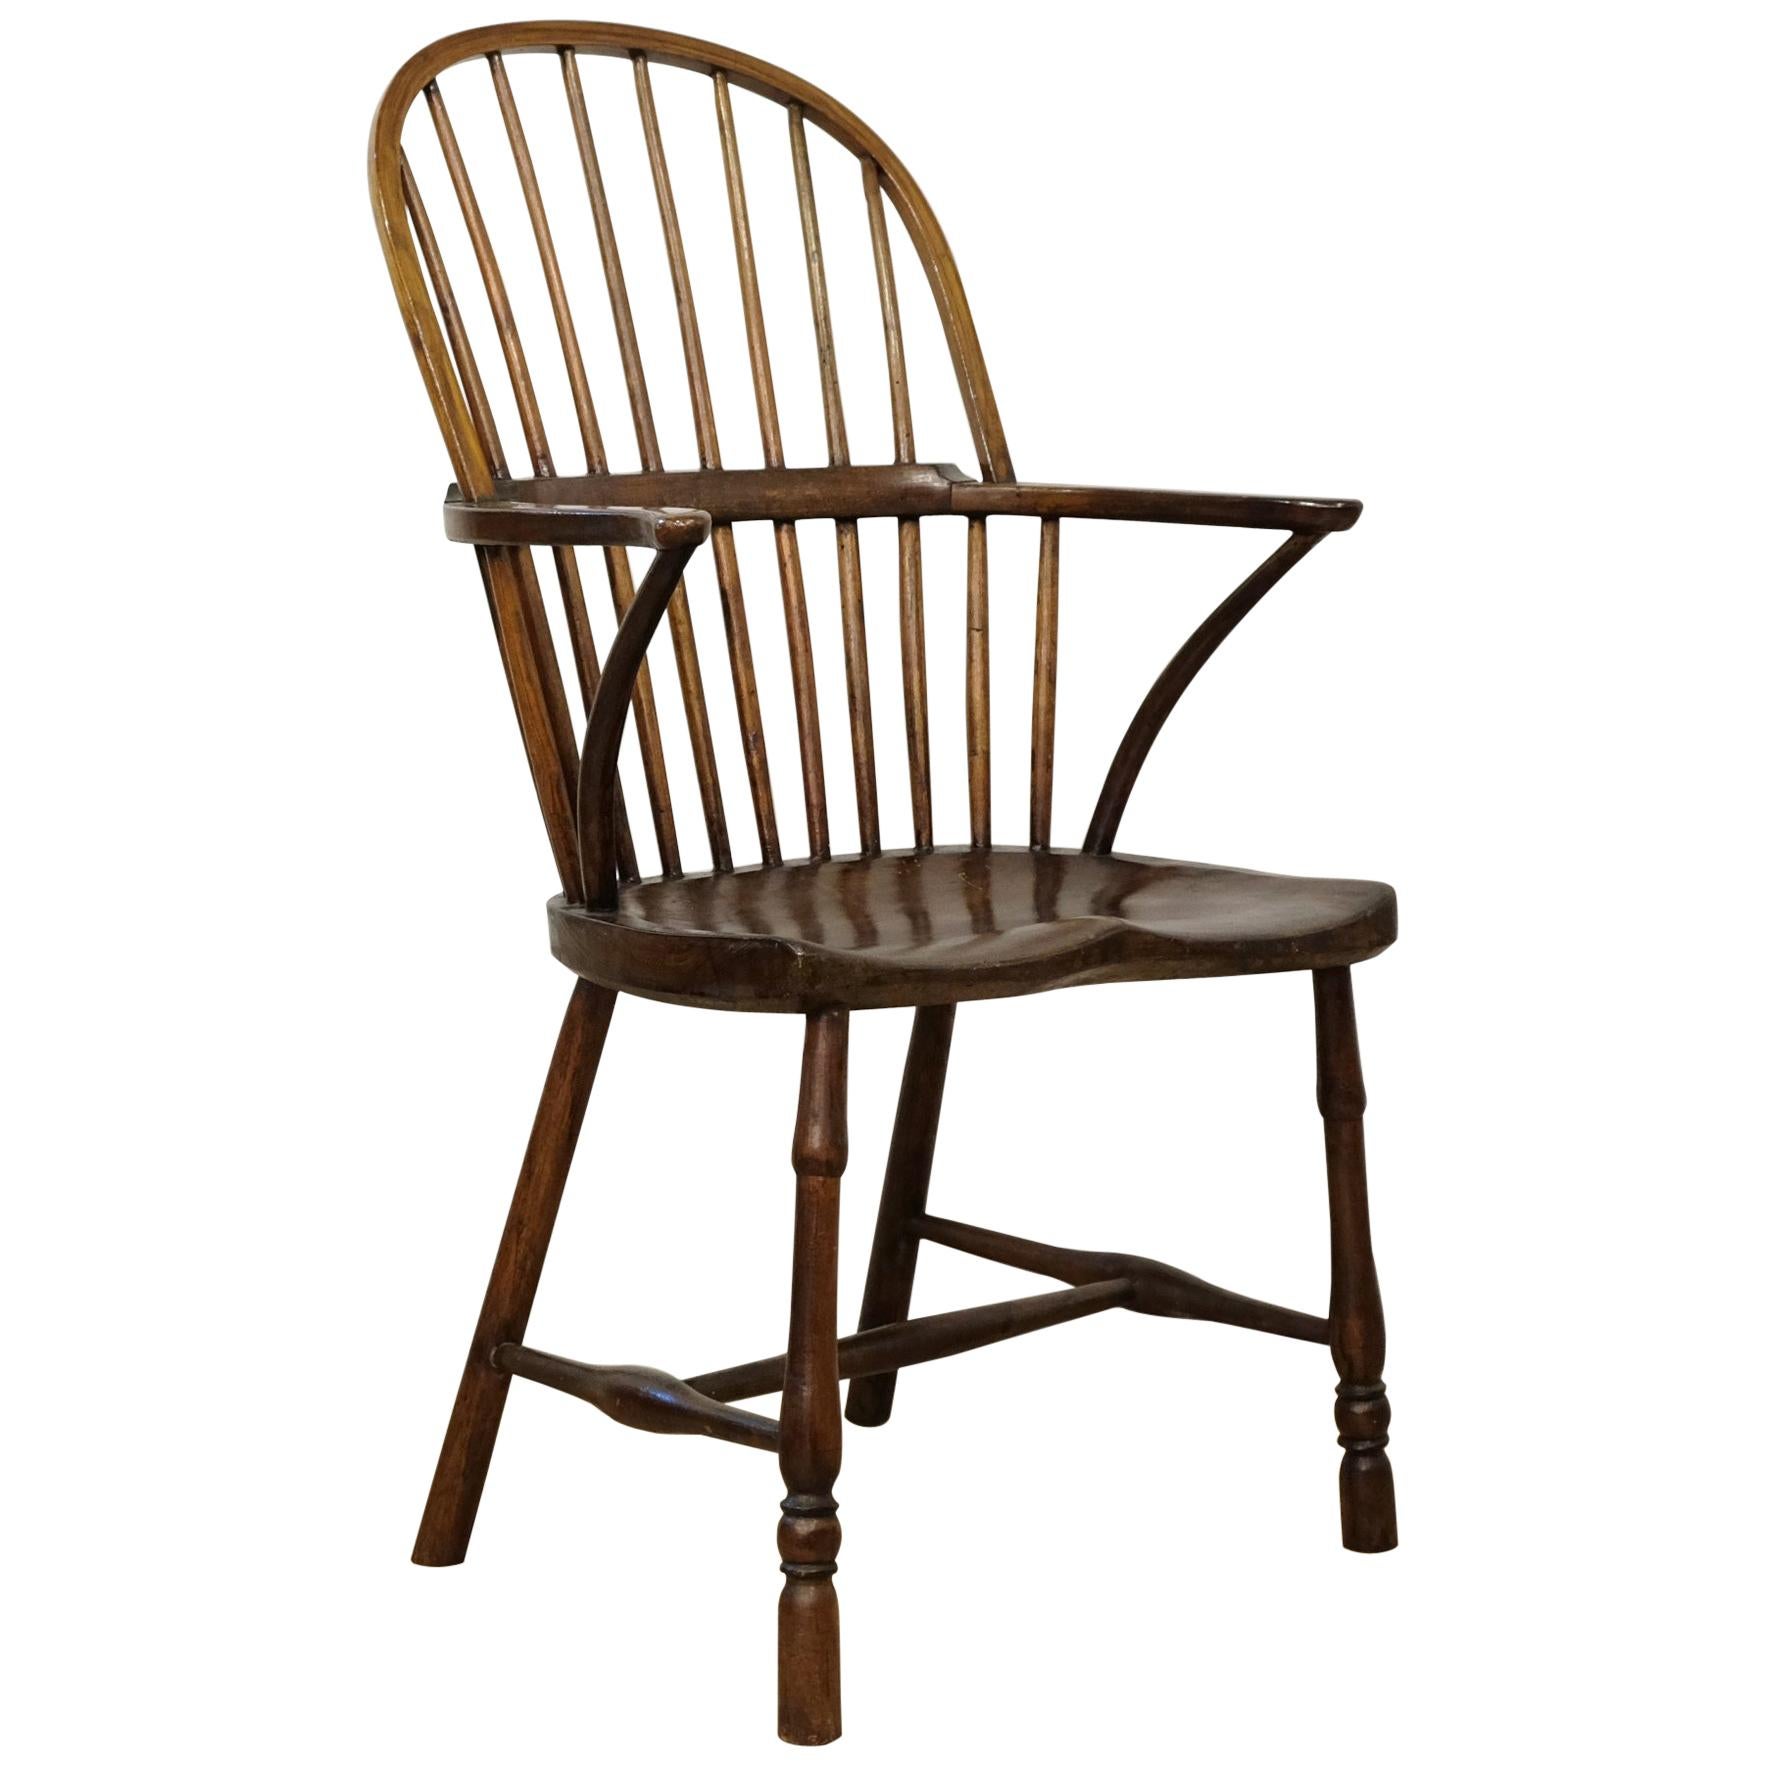 English West Country Mid-19th Century Stickback Windsor Chair